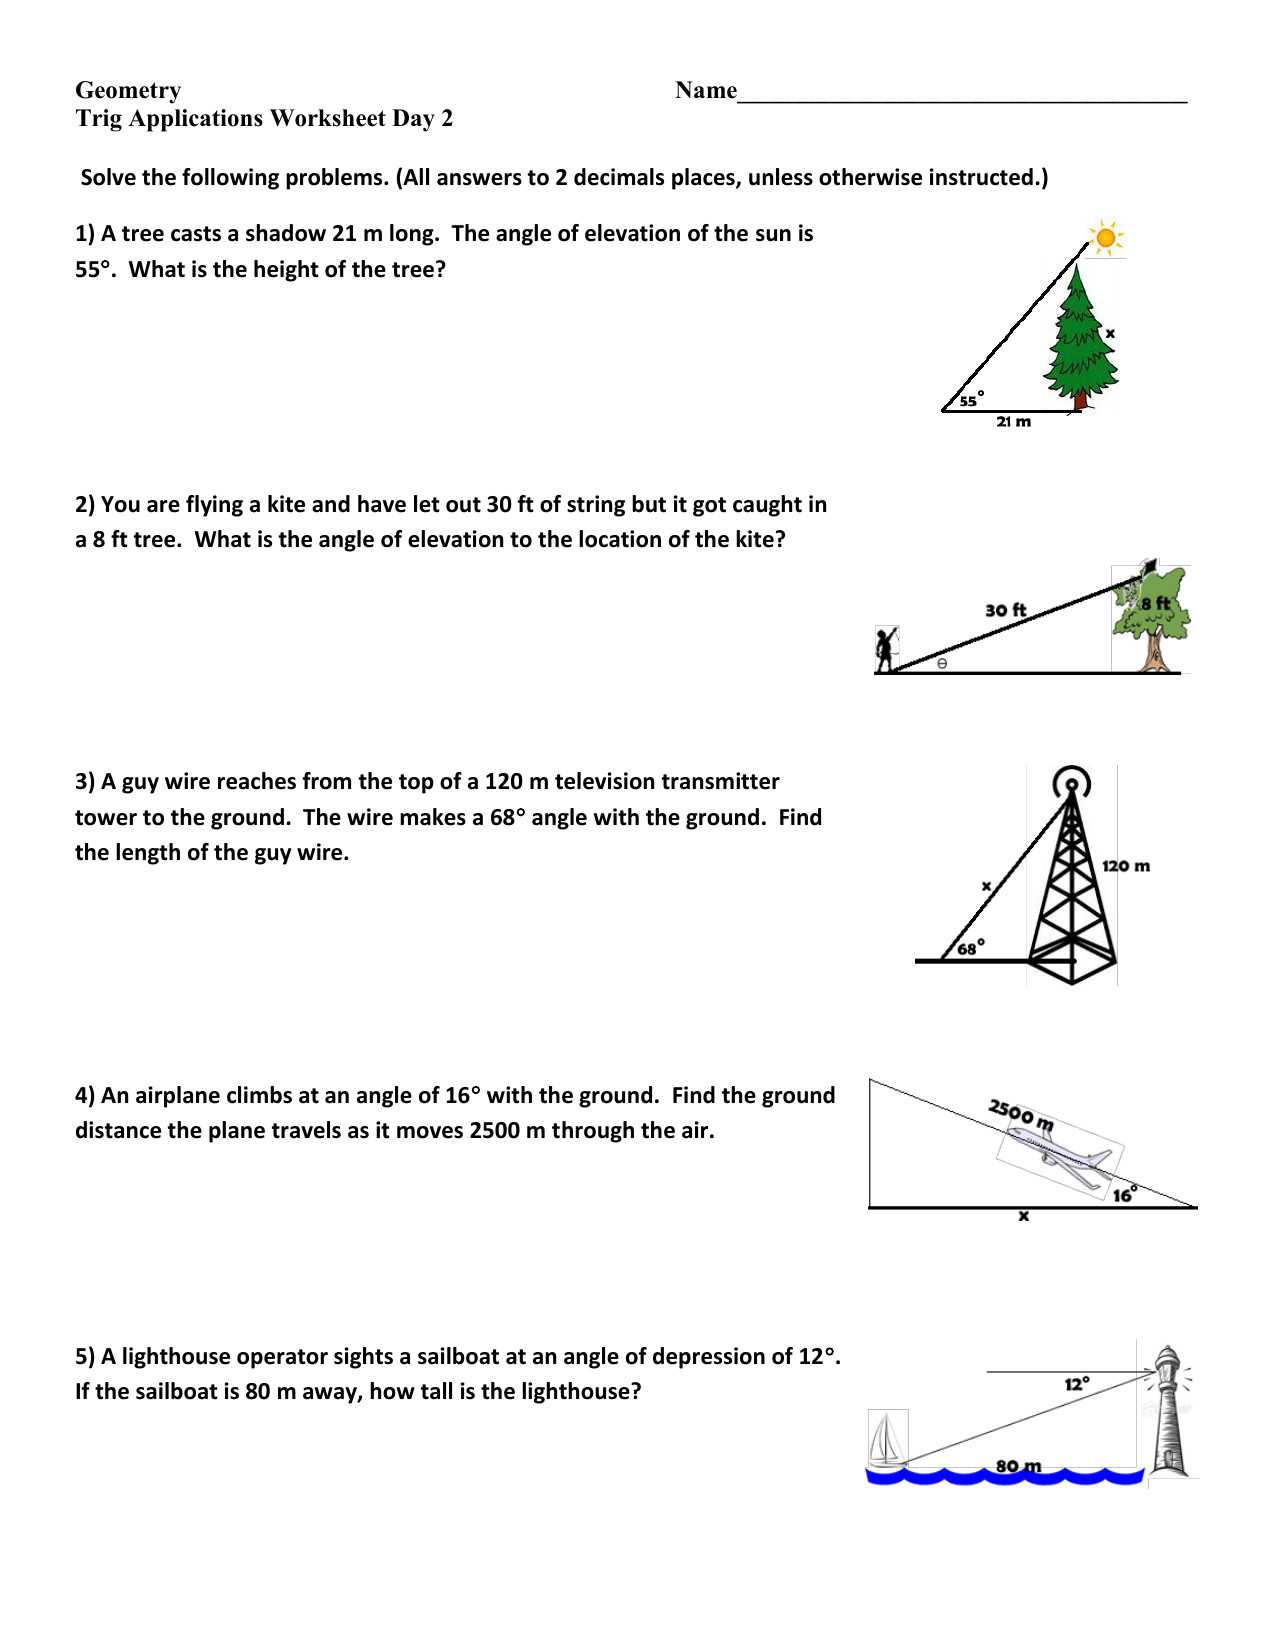 Trigonometry Finding Angles Worksheet Answers Along with Right Triangle Trigonometry Worksheet Answers Fresh Special Right